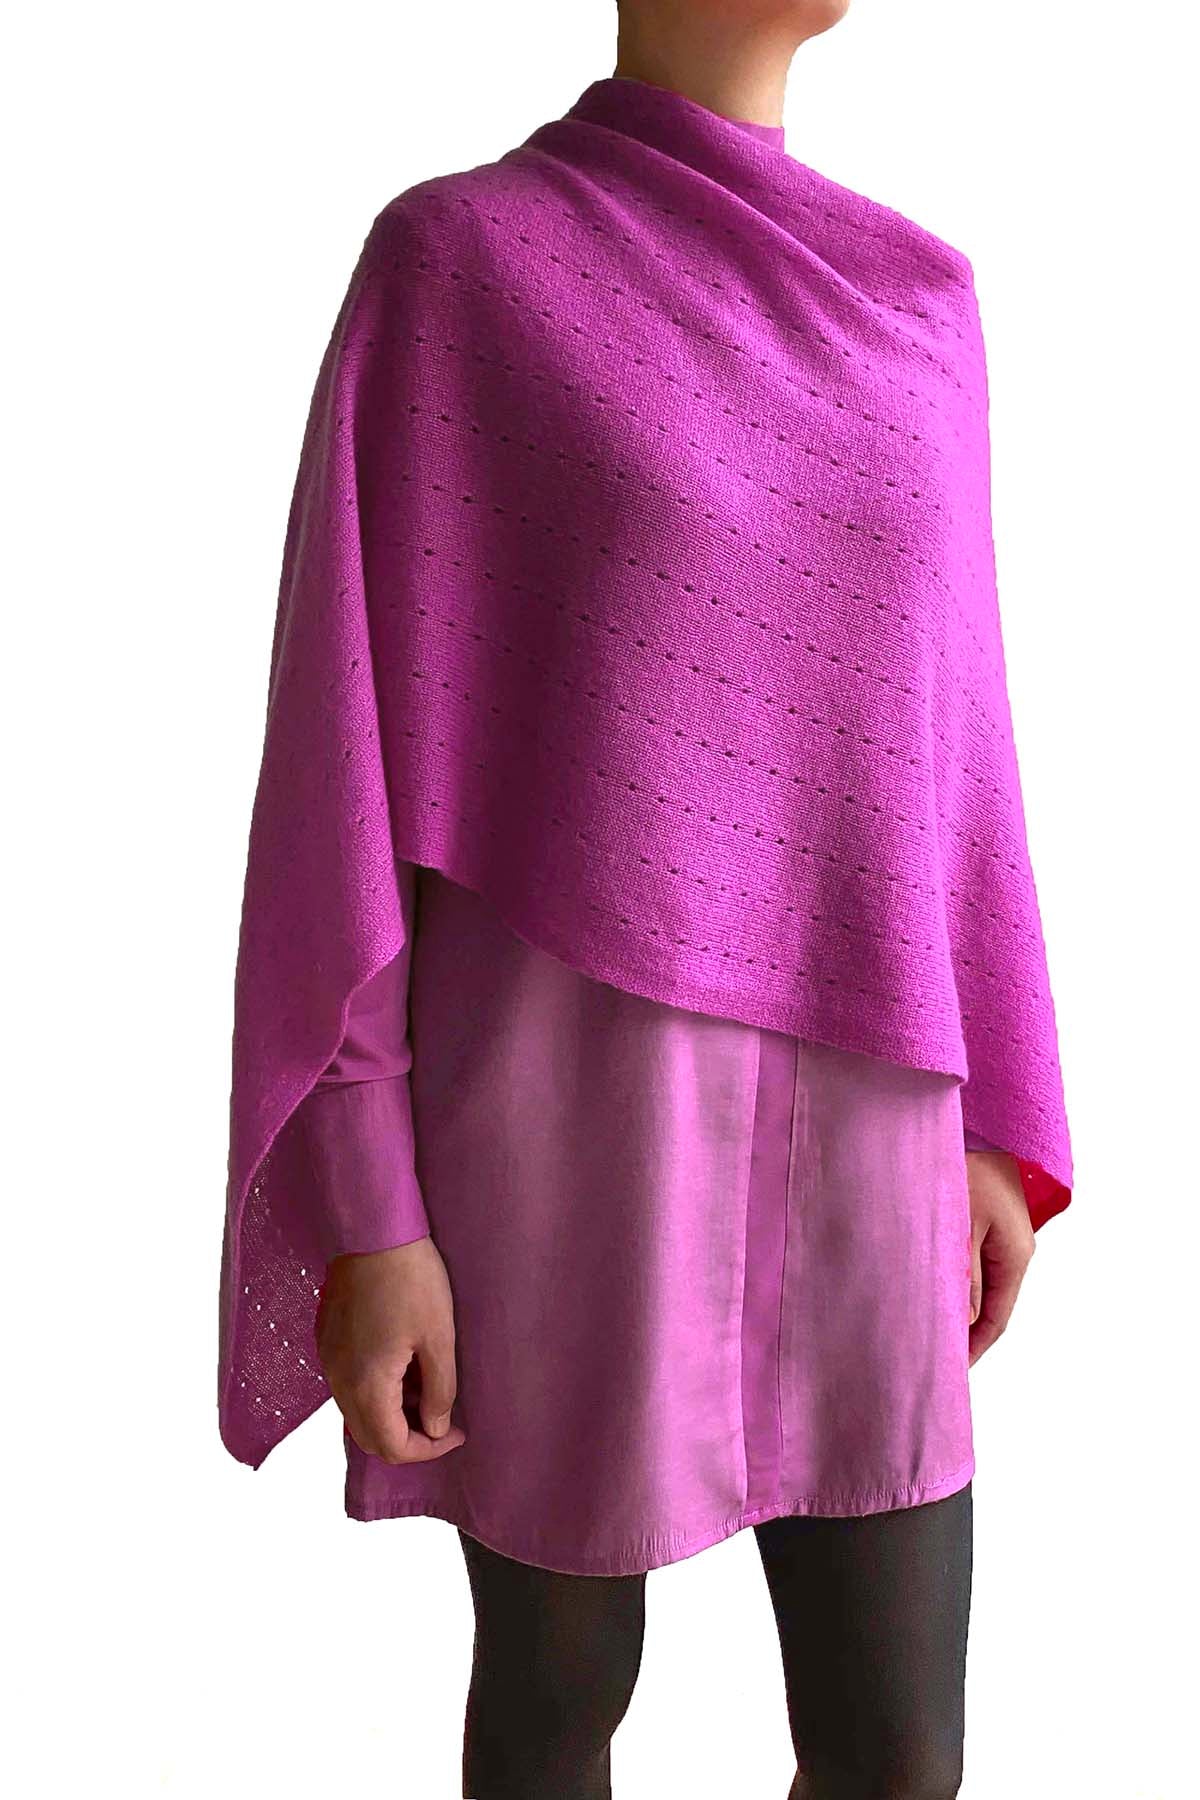 Hot pink lightweight summer cashmere poncho with buttons Multiway